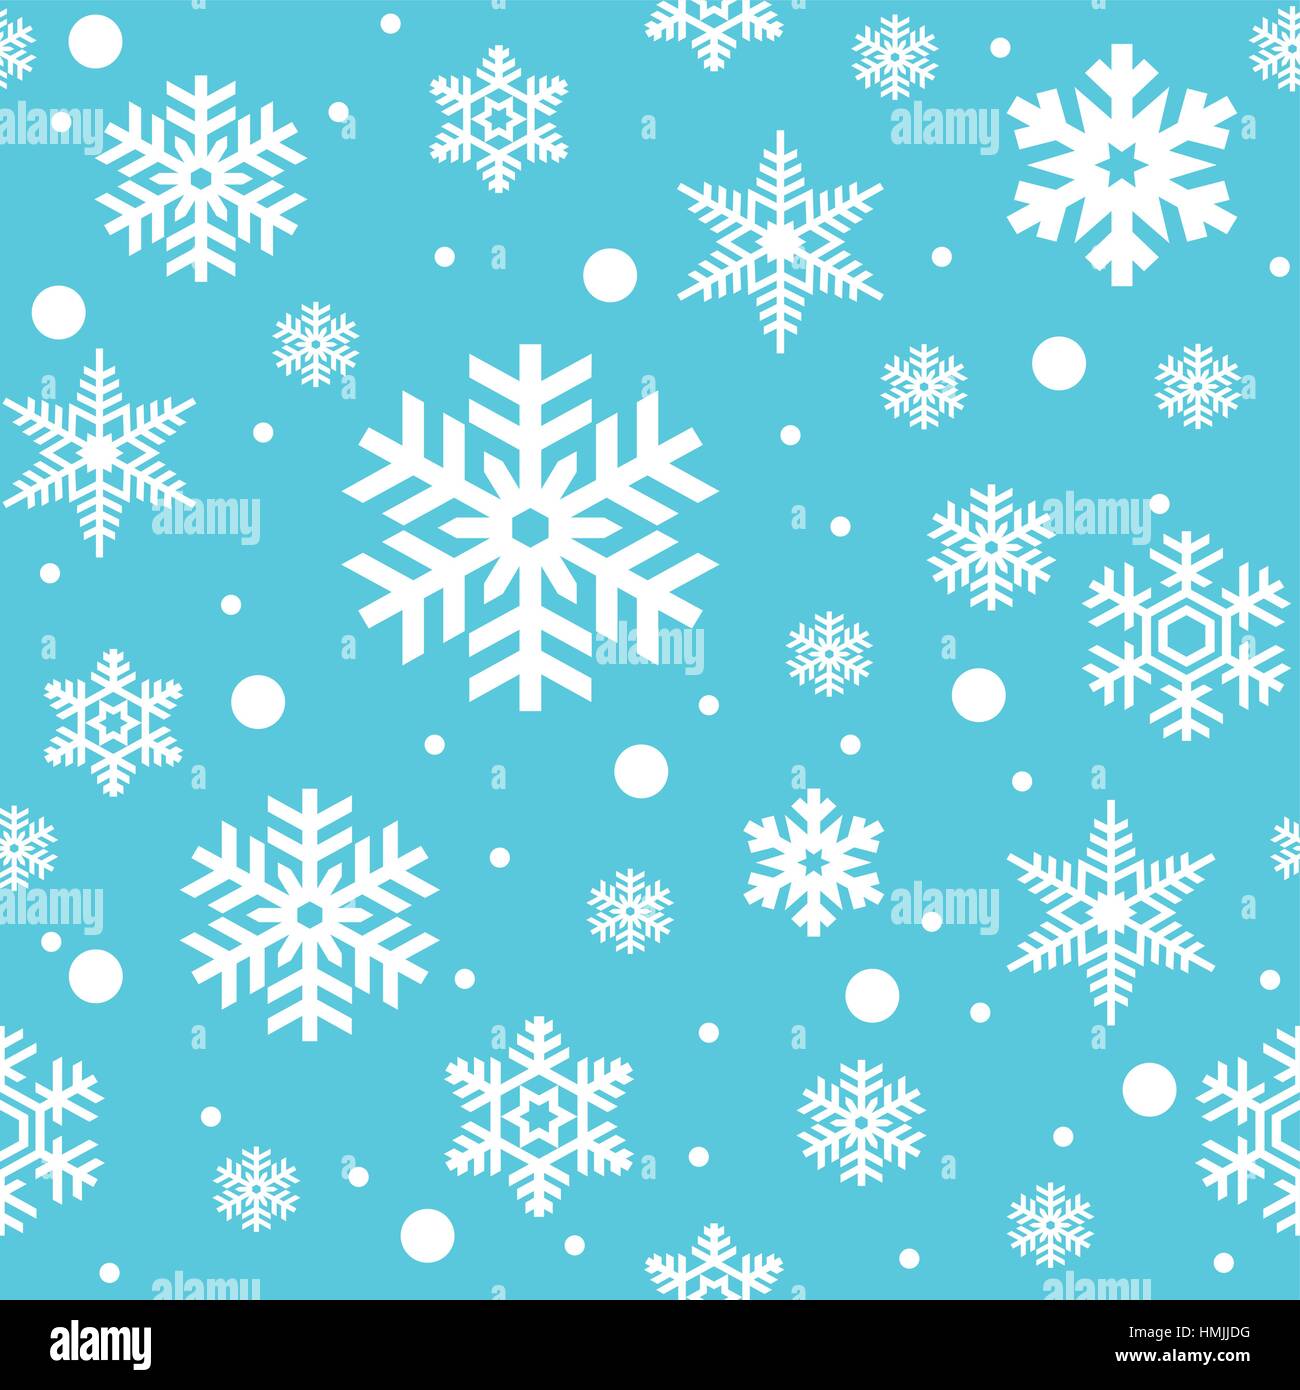 Snowflake Images – Browse 2,904,220 Stock Photos, Vectors, and